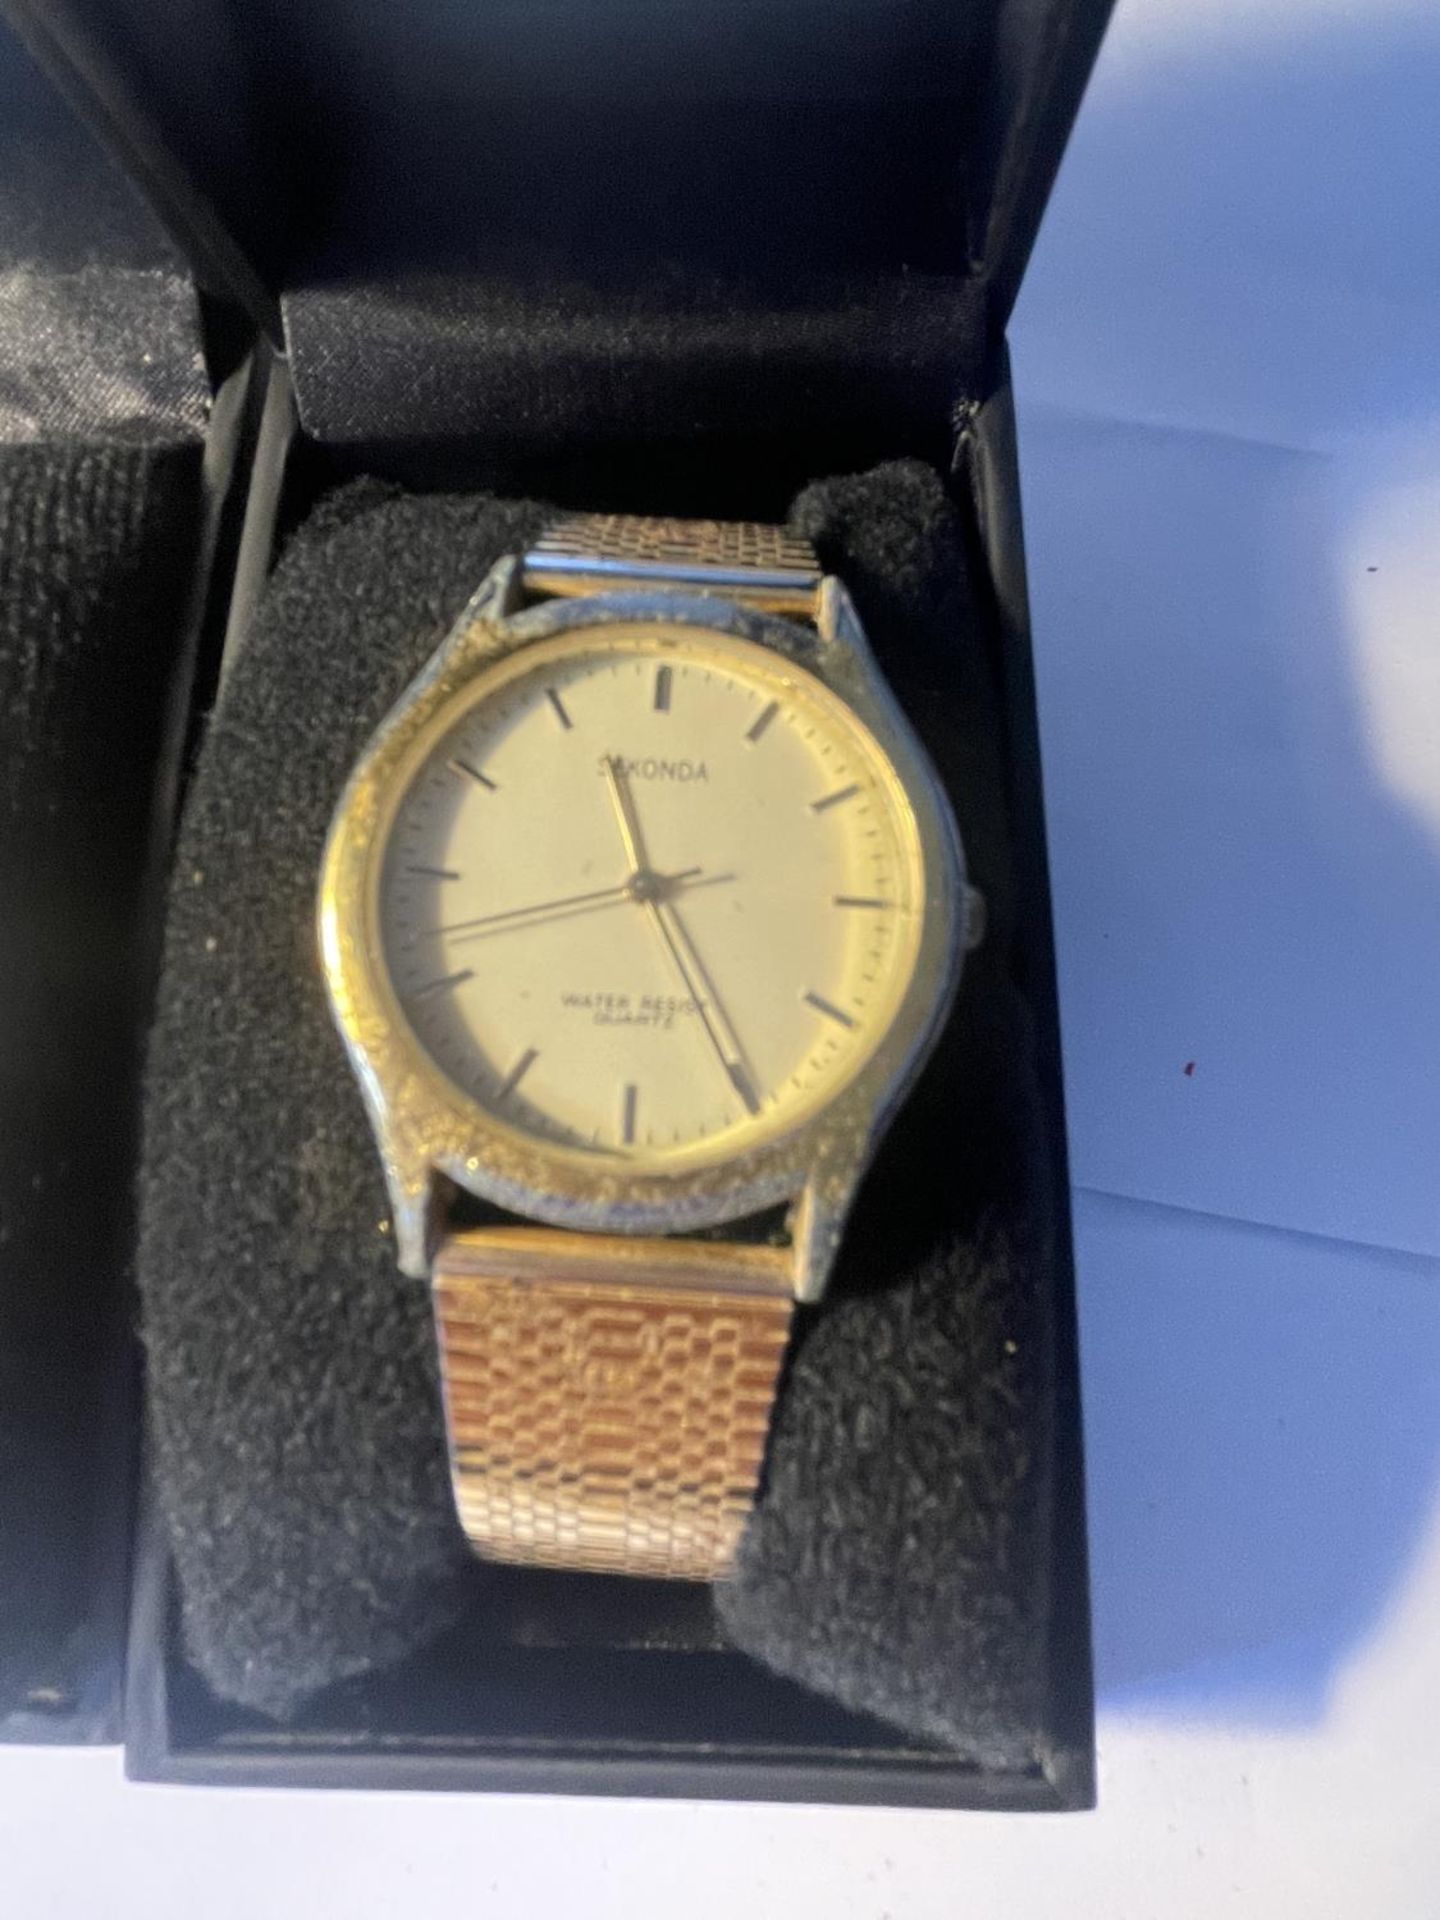 TWO SEKONDA WRIST WATCHES IN PRESENTATION BOXES SEEN WORKING BUT NO WARRANTY - Image 3 of 4